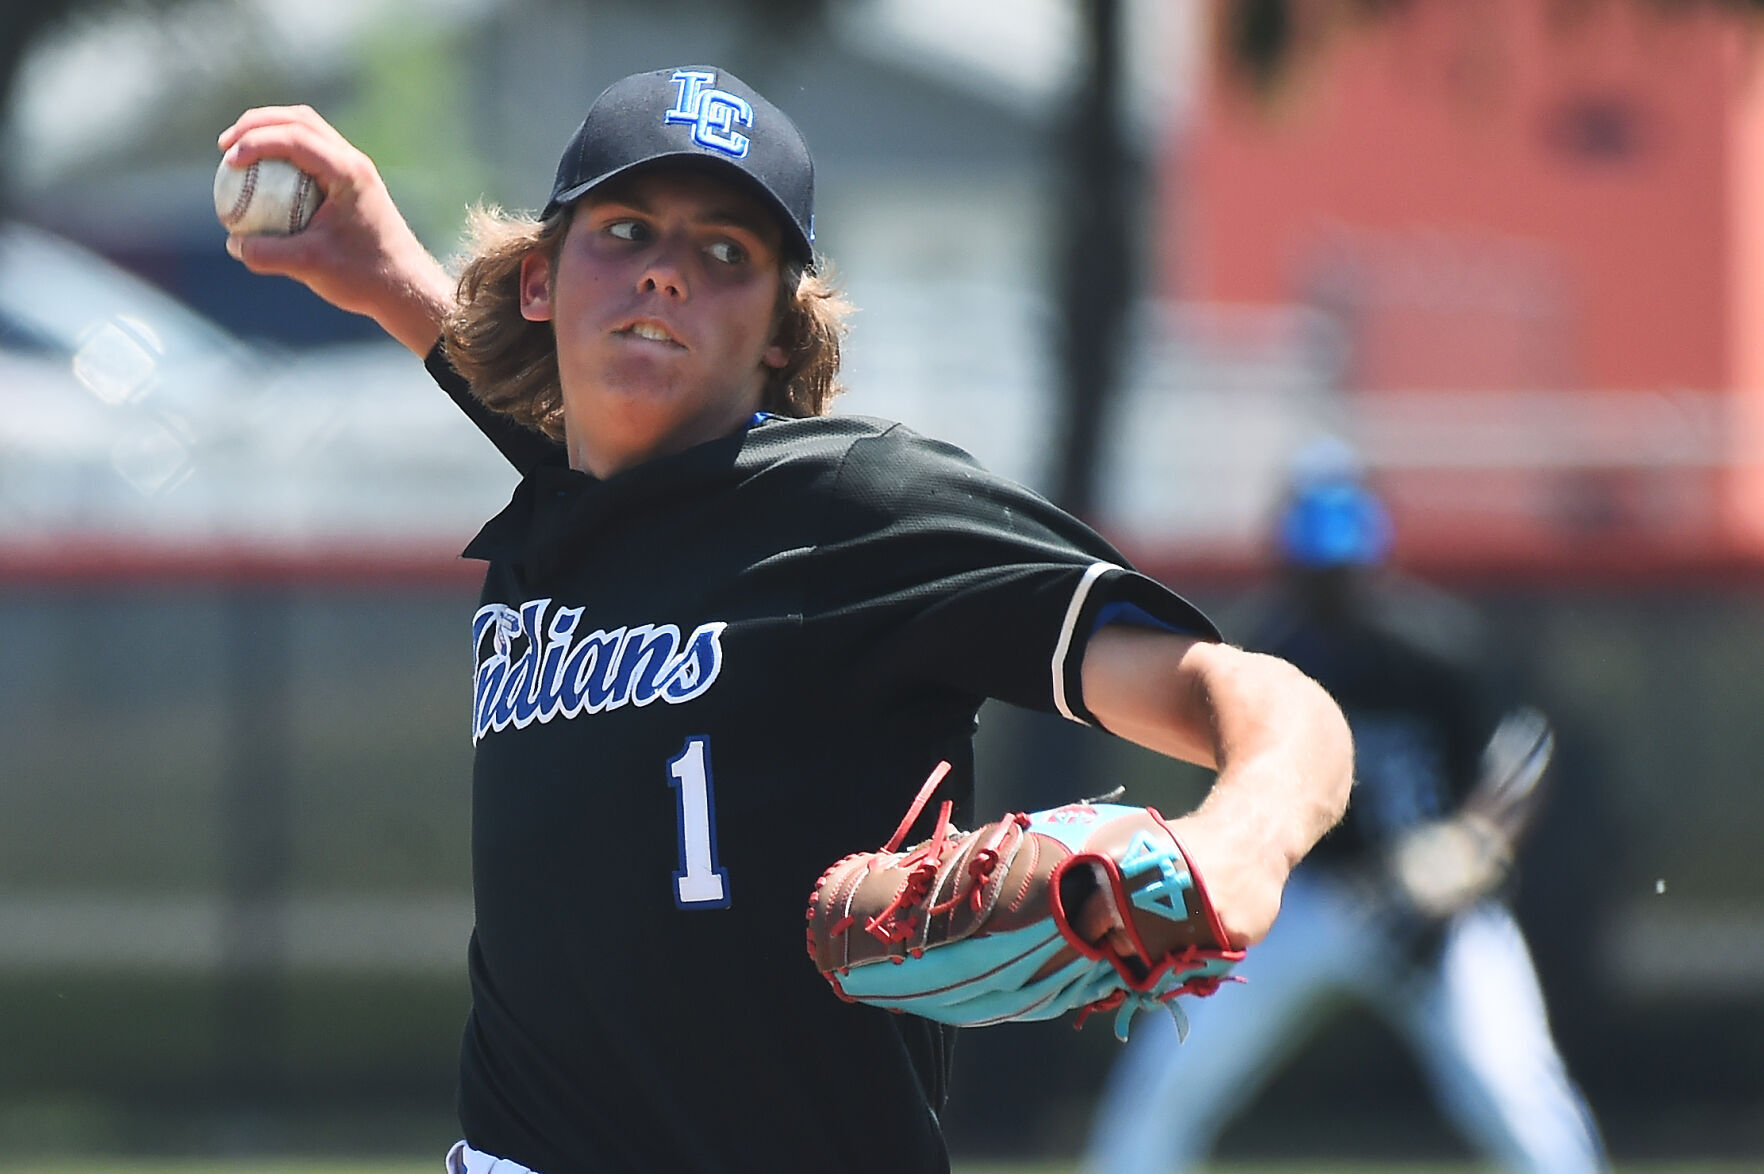 Top Prep Baseball Stat Leaders in the Region: Stanton, Hill, Cappetto & More